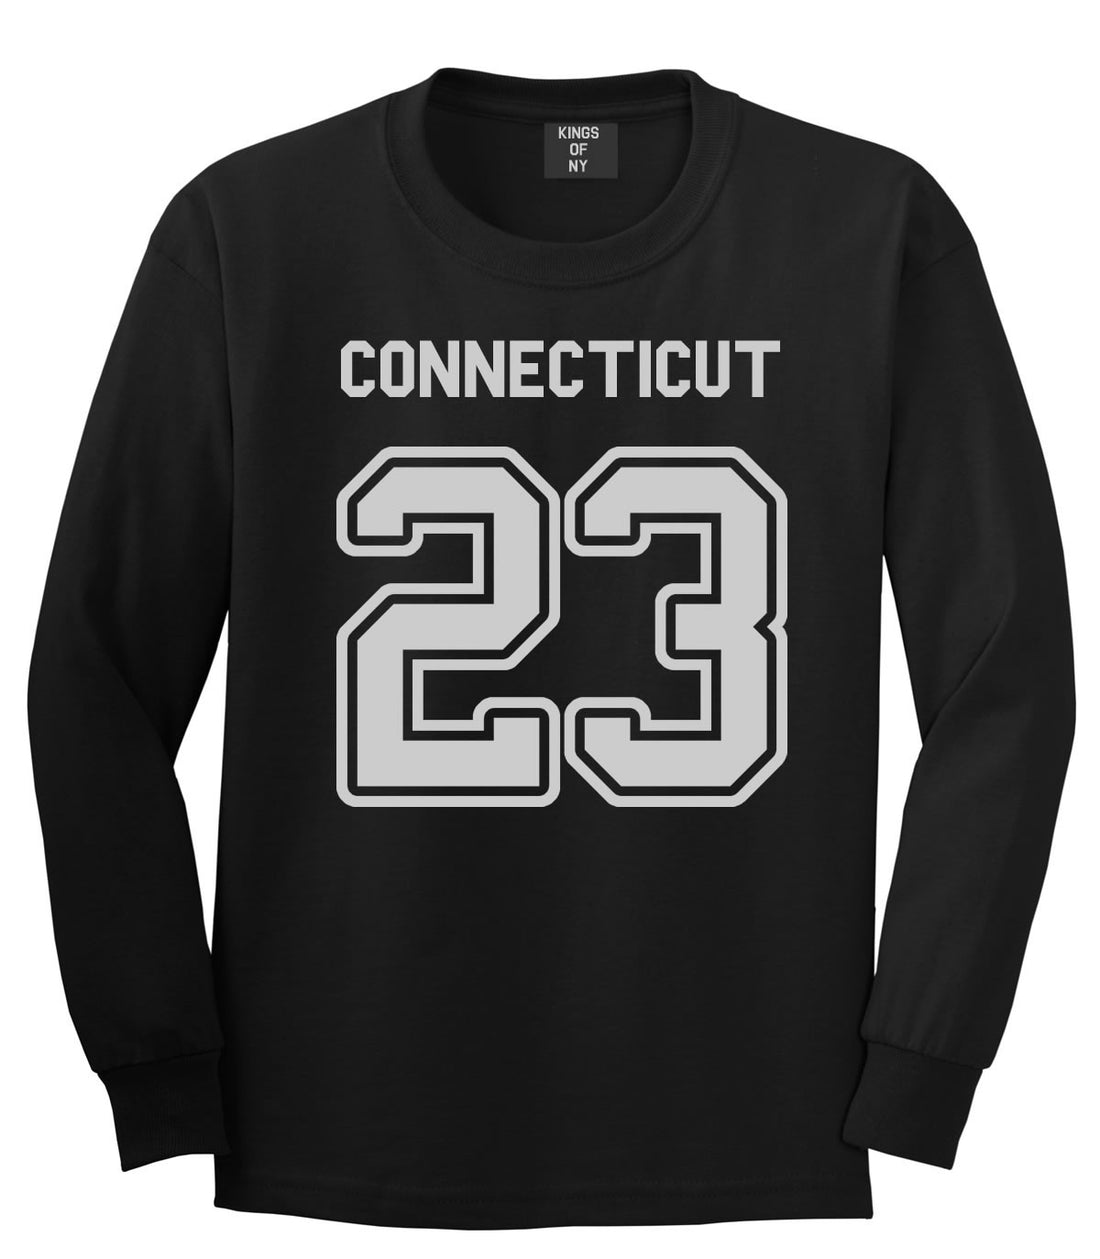 Sport Style Connecticut 23 Team State Jersey Long Sleeve T-Shirt By Kings Of NY